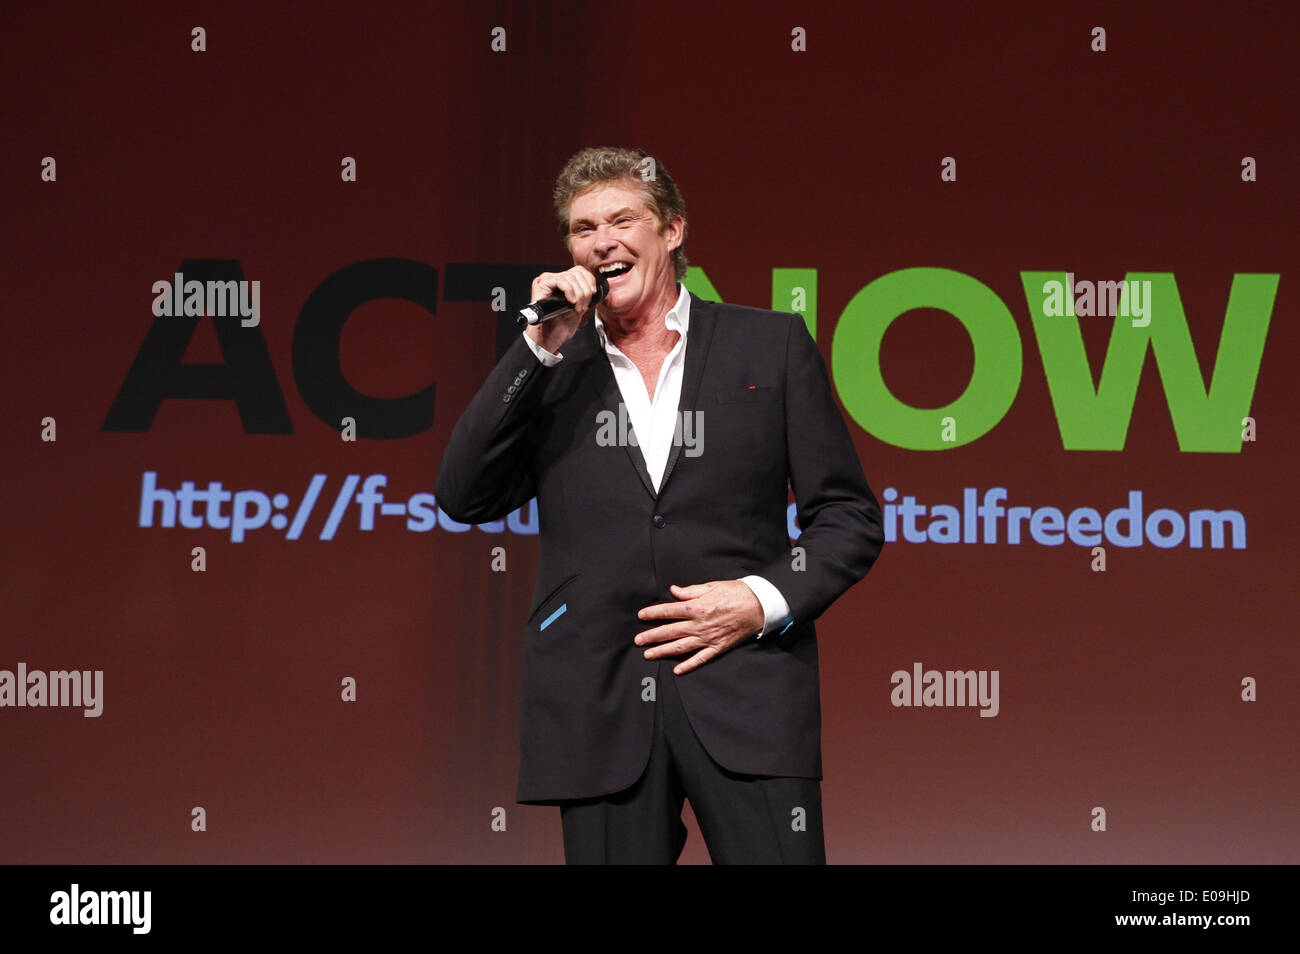 American Actor And Singer David Hasselhoff At The Media Convention Re